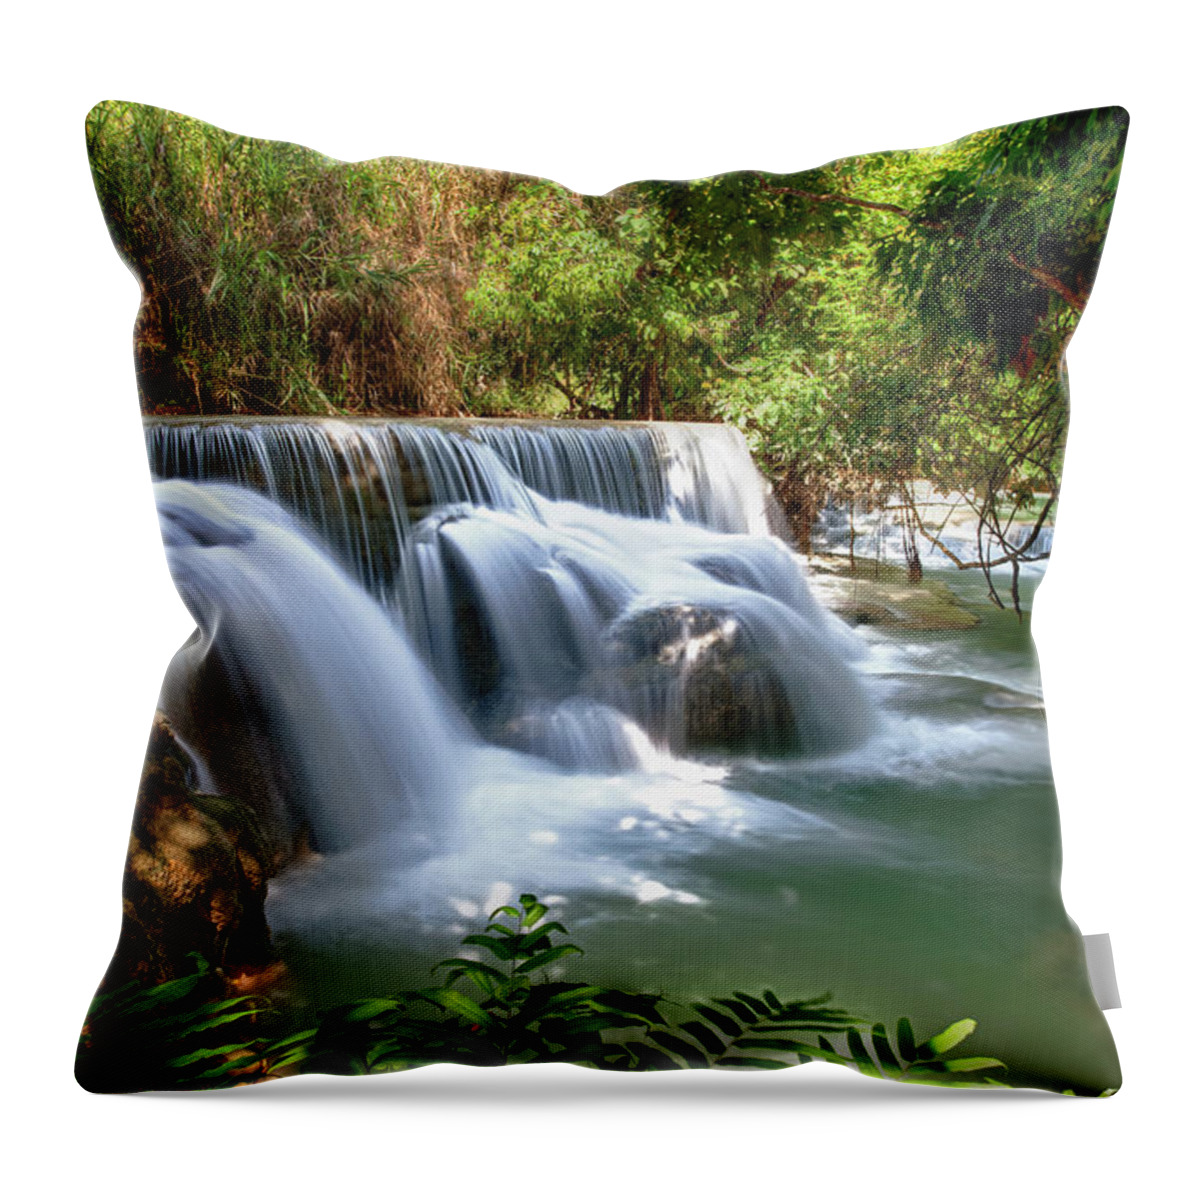 Tropical Rainforest Throw Pillow featuring the photograph Flowing Water Under Trees - Laos by Fototrav